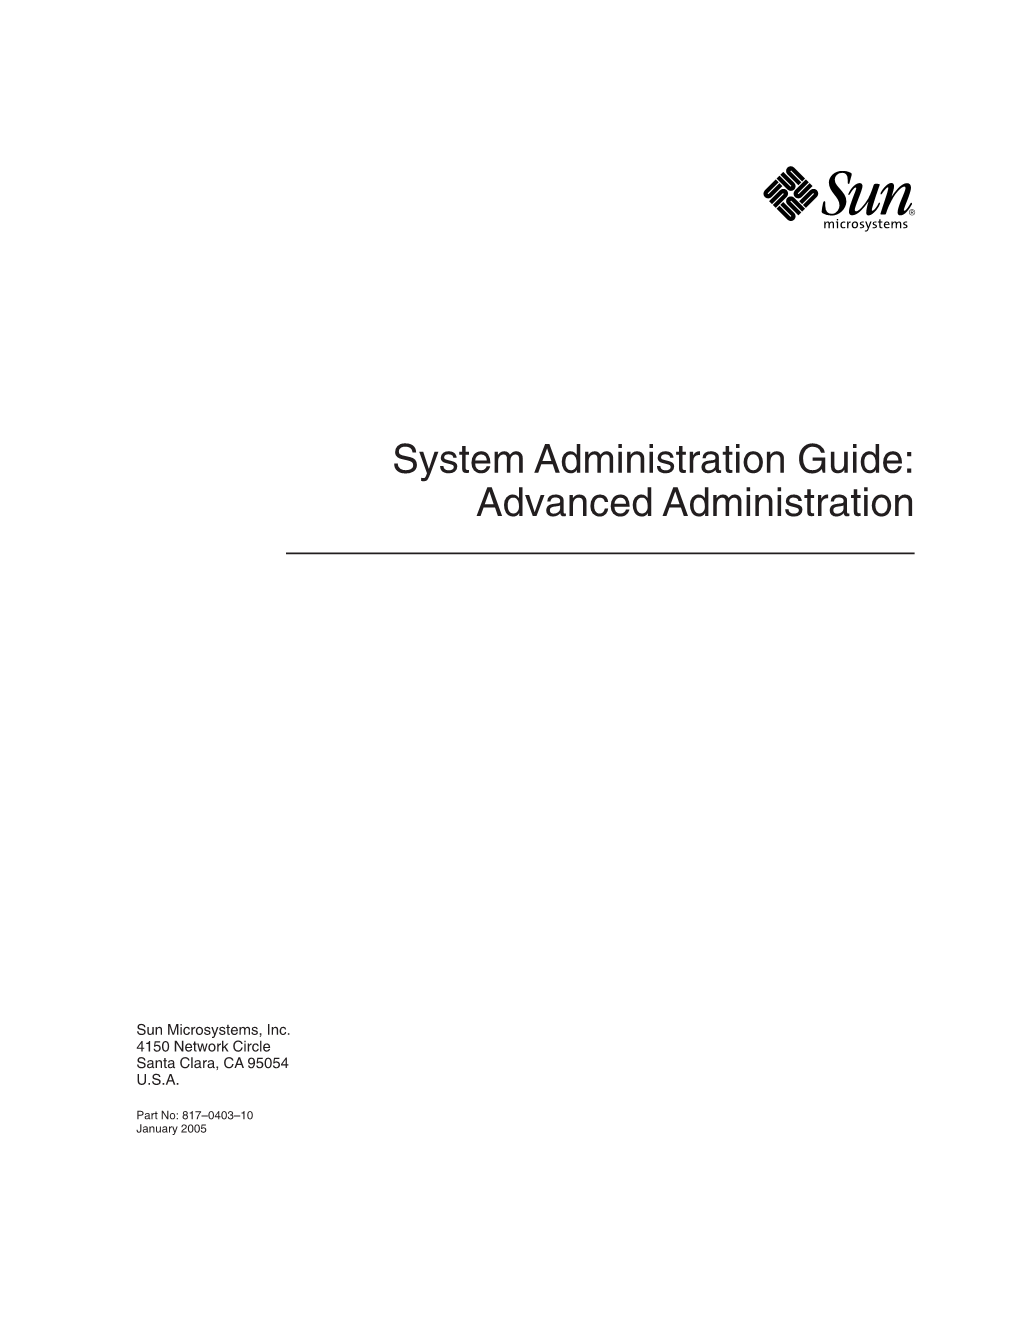 Sun Microsystems System Administration Guide: Advanced